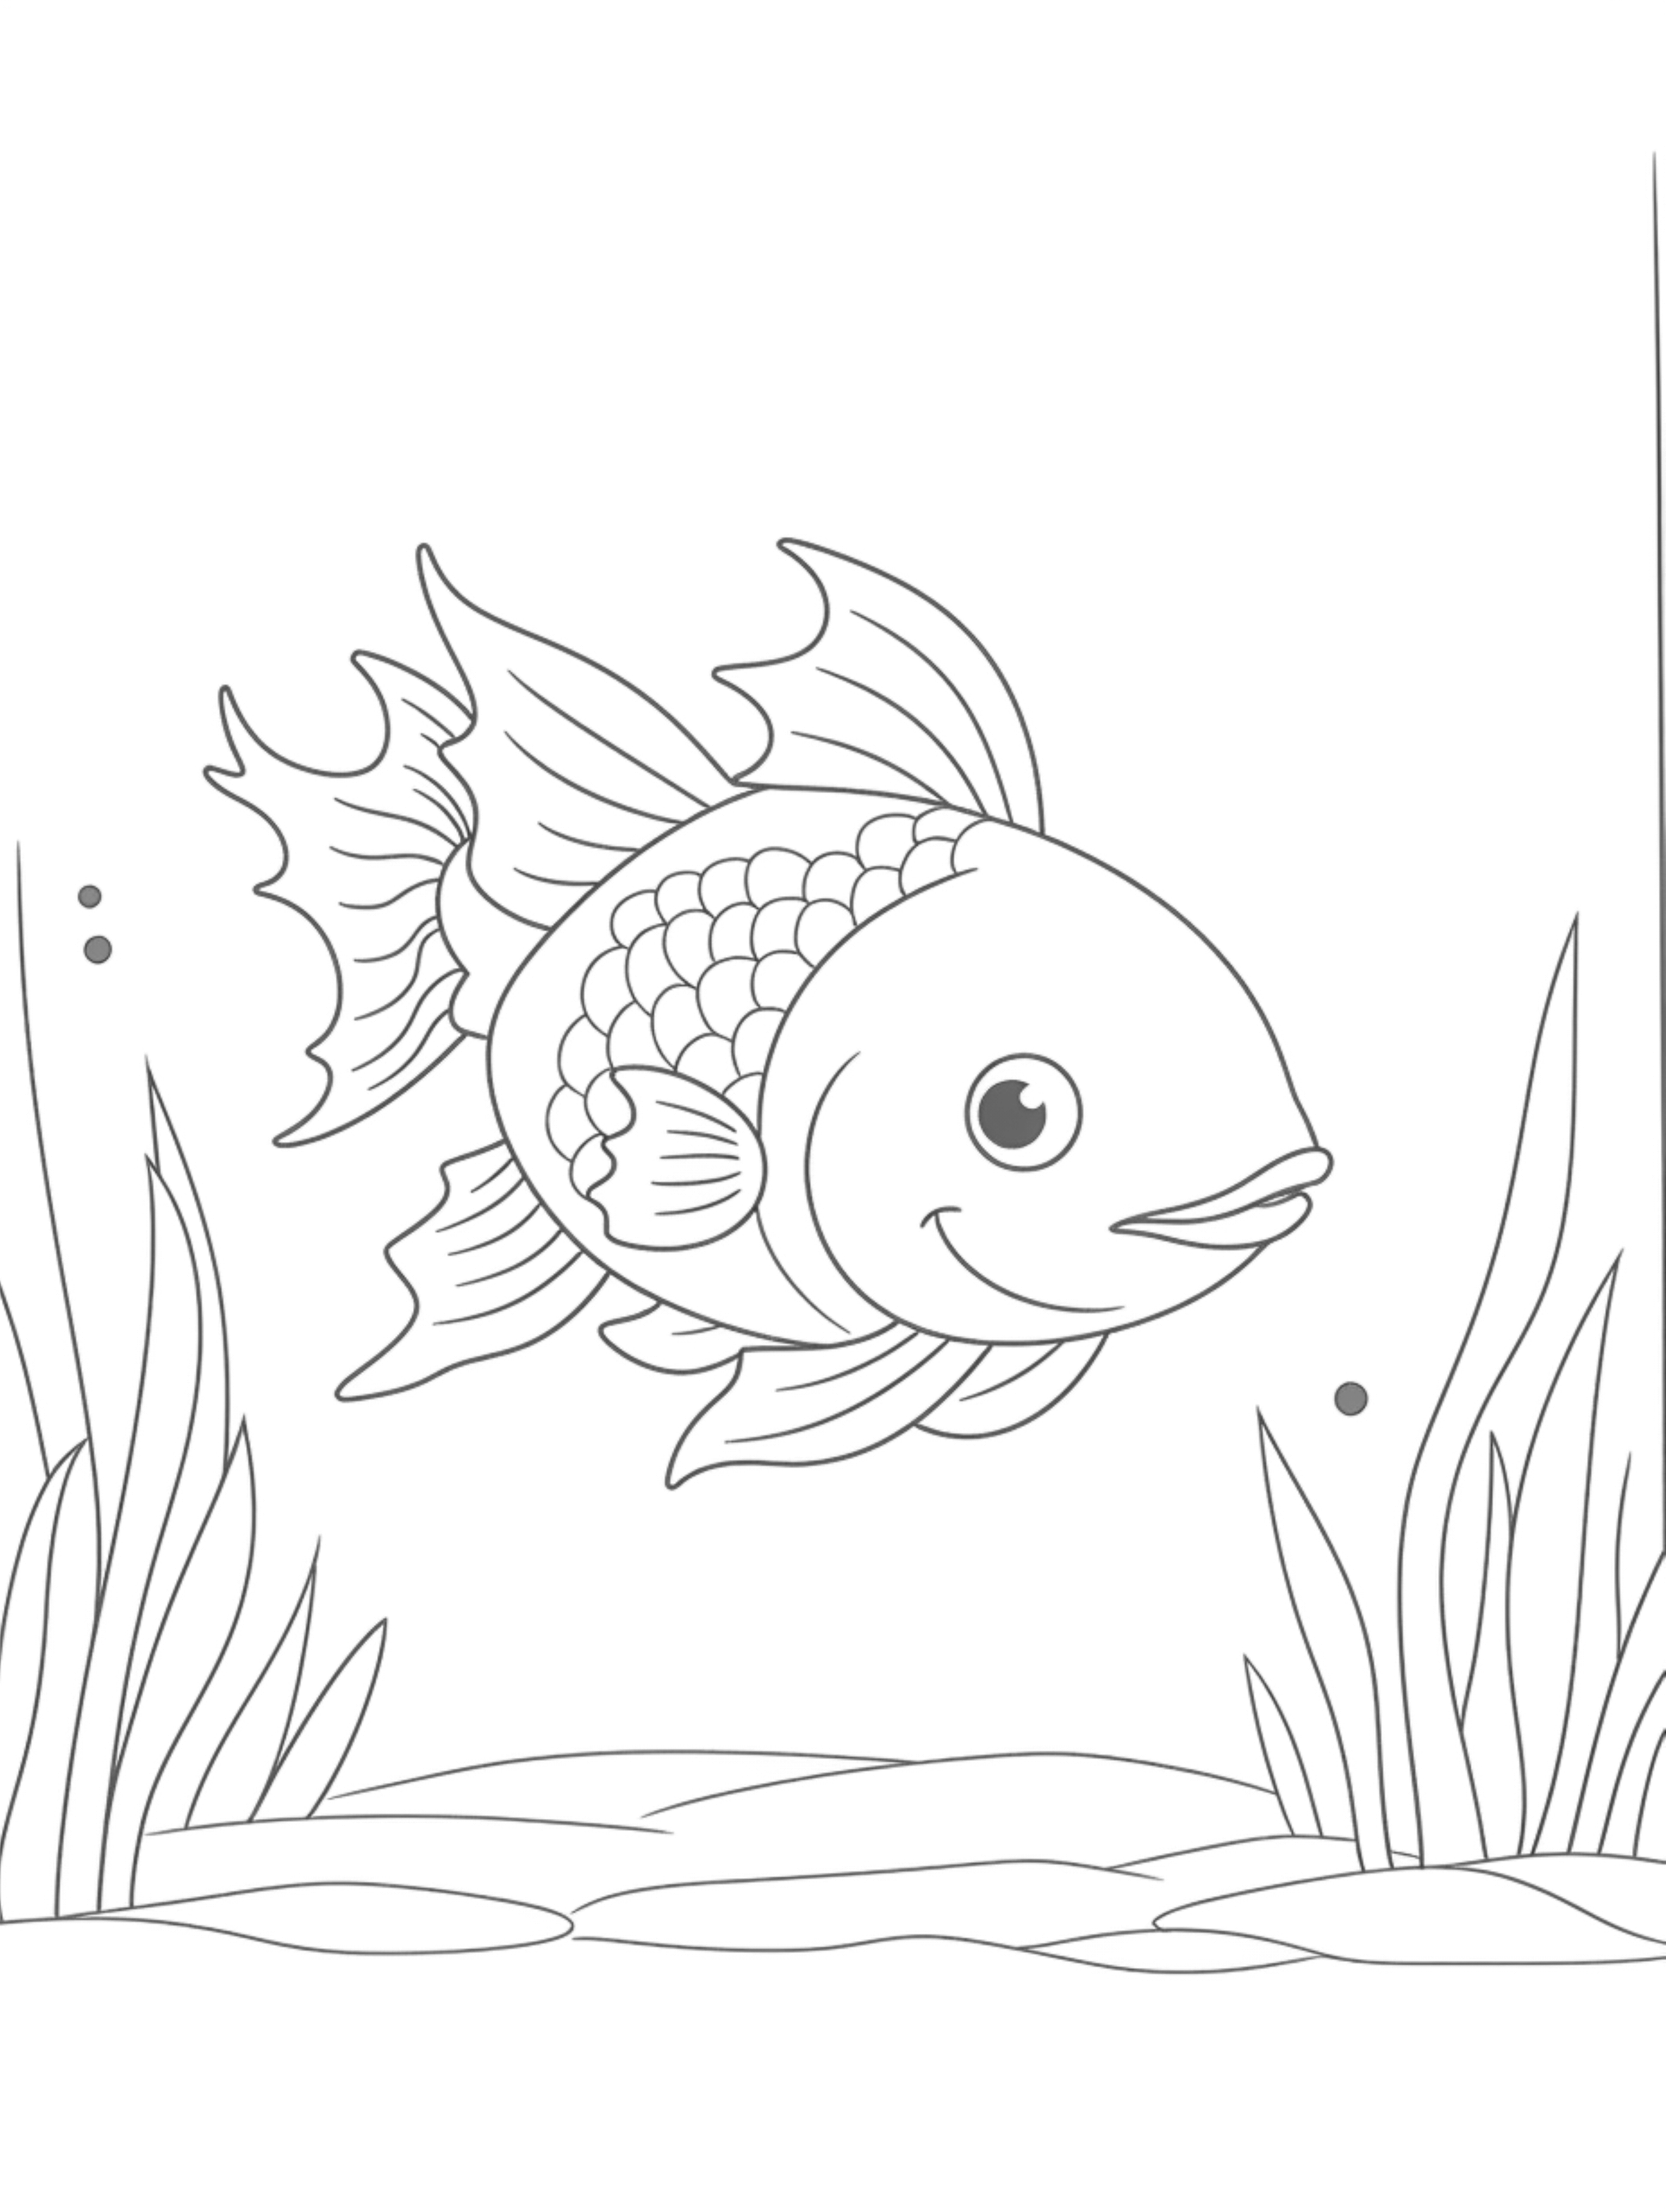 goldfish coloring page